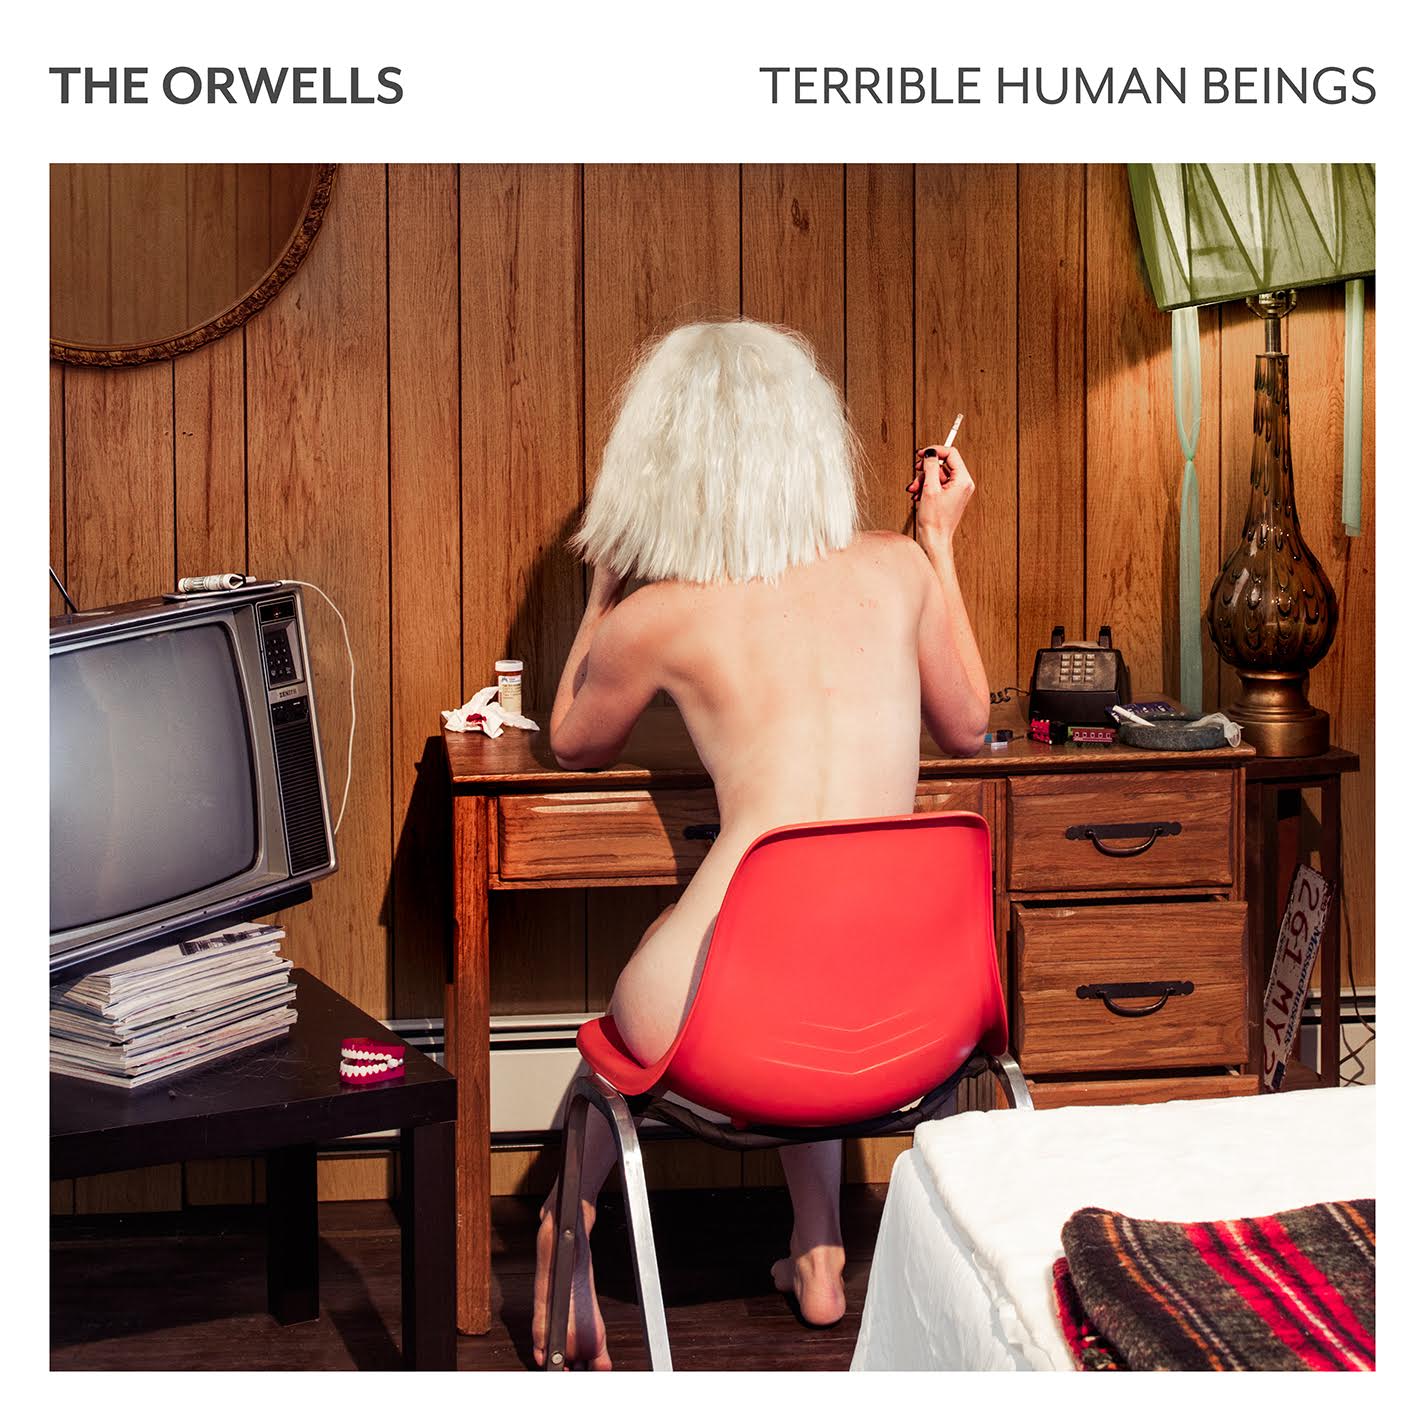 The Orwells Are Moving Past Growing Pains on <em>Terrible Human Beings</em>” title=”unnamed-1″ data-original-id=”213719″ data-adjusted-id=”213719″ class=”sm_size_full_width sm_alignment_center ” /></p>
<p>The 13-track collection finds the band trying out some new territory, focusing a little less on the danceable, buoyant guitar rhythms of their first two albums to make room for “weird drum-loop experimentations, a lot of backward stuff, and different vocal techniques,” according to O’Keefe.</p>
<p>This time around, the Orwells are fancying themselves craftsmen. Yes, they’re still in their early twenties, but they’re more interested in moving forward than simply getting loused on the same tales of knocking back beers with friends and spending wild nights with strangers.</p>
<p>“I have a slightly different view in the short span of a year or two,” Cuomo says. “It pushes [you] more as an artist … You can’t get away with as much—and I don’t think we want to, either.”</p>
</p></p></p><p>To see our running list of the top 100 greatest rock stars of all time, <a href=